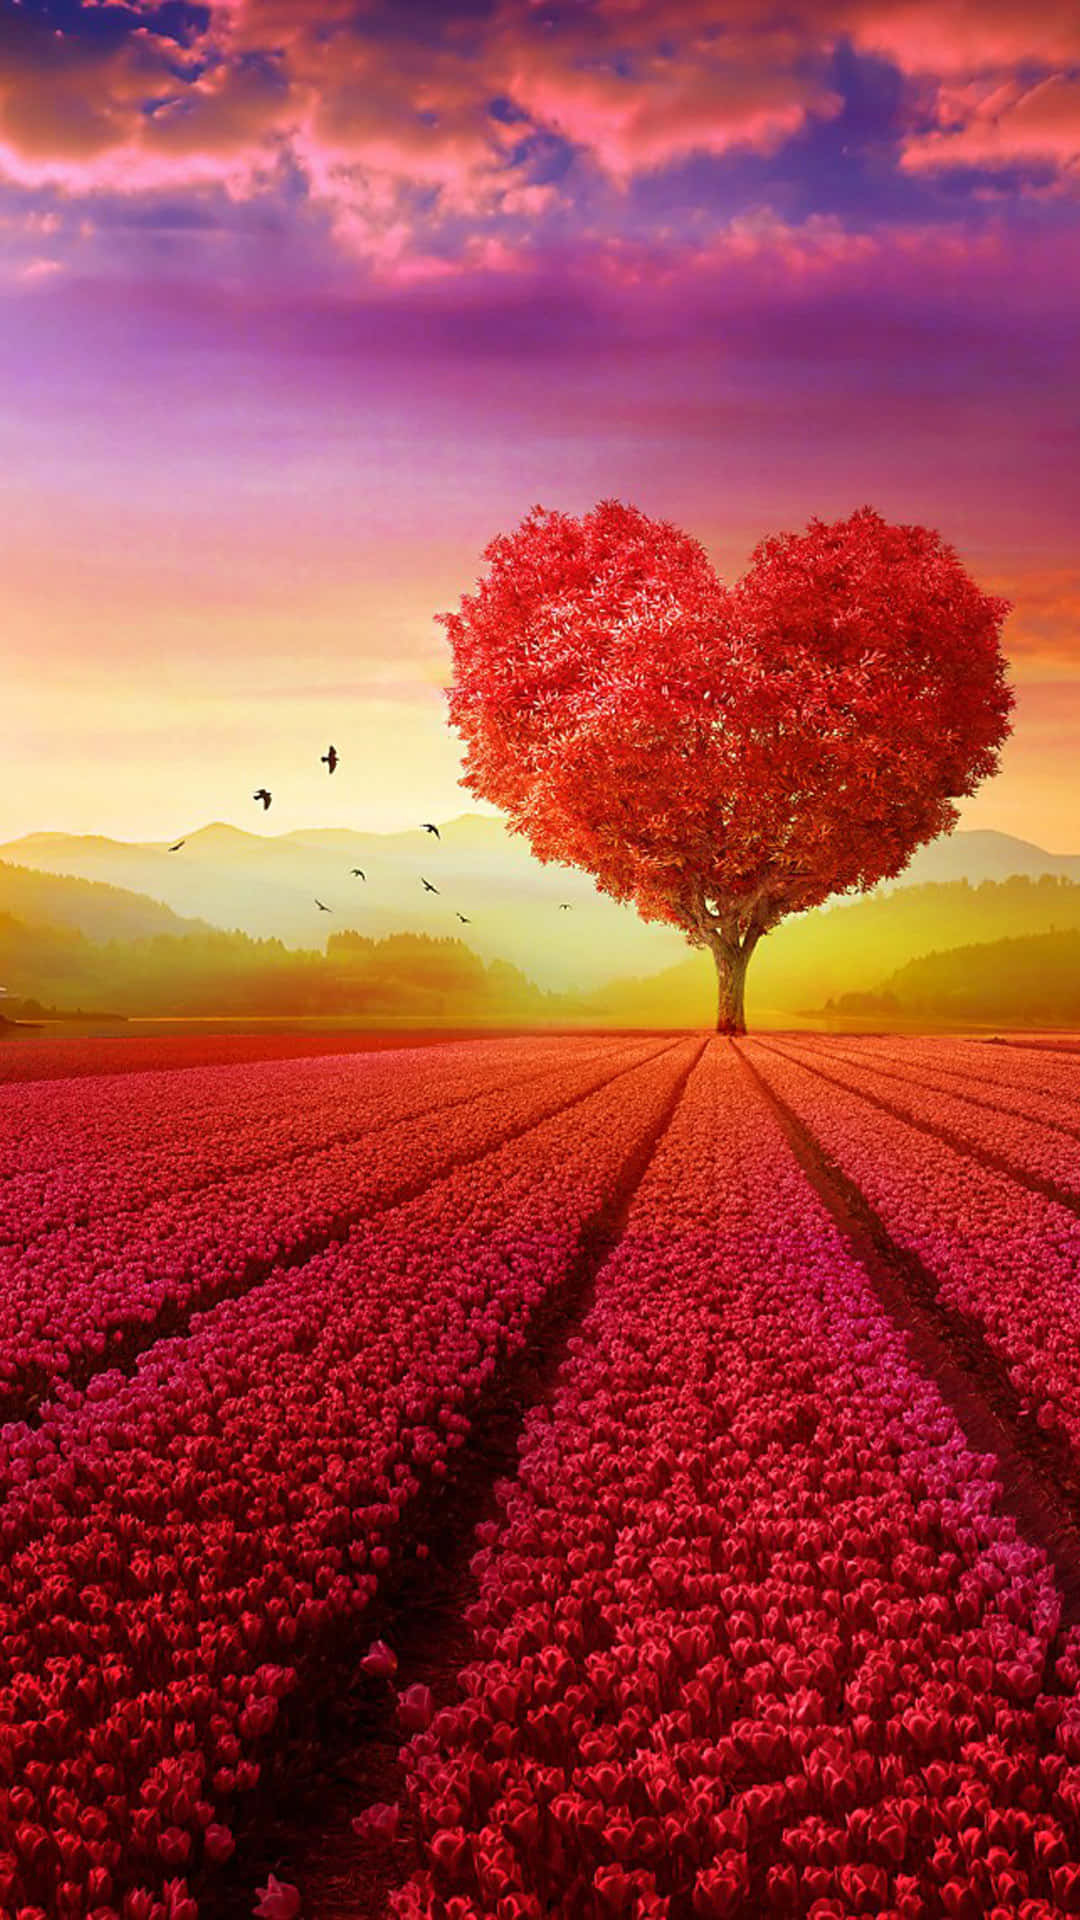 A Red Heart Shaped Tree In A Field Of Flowers